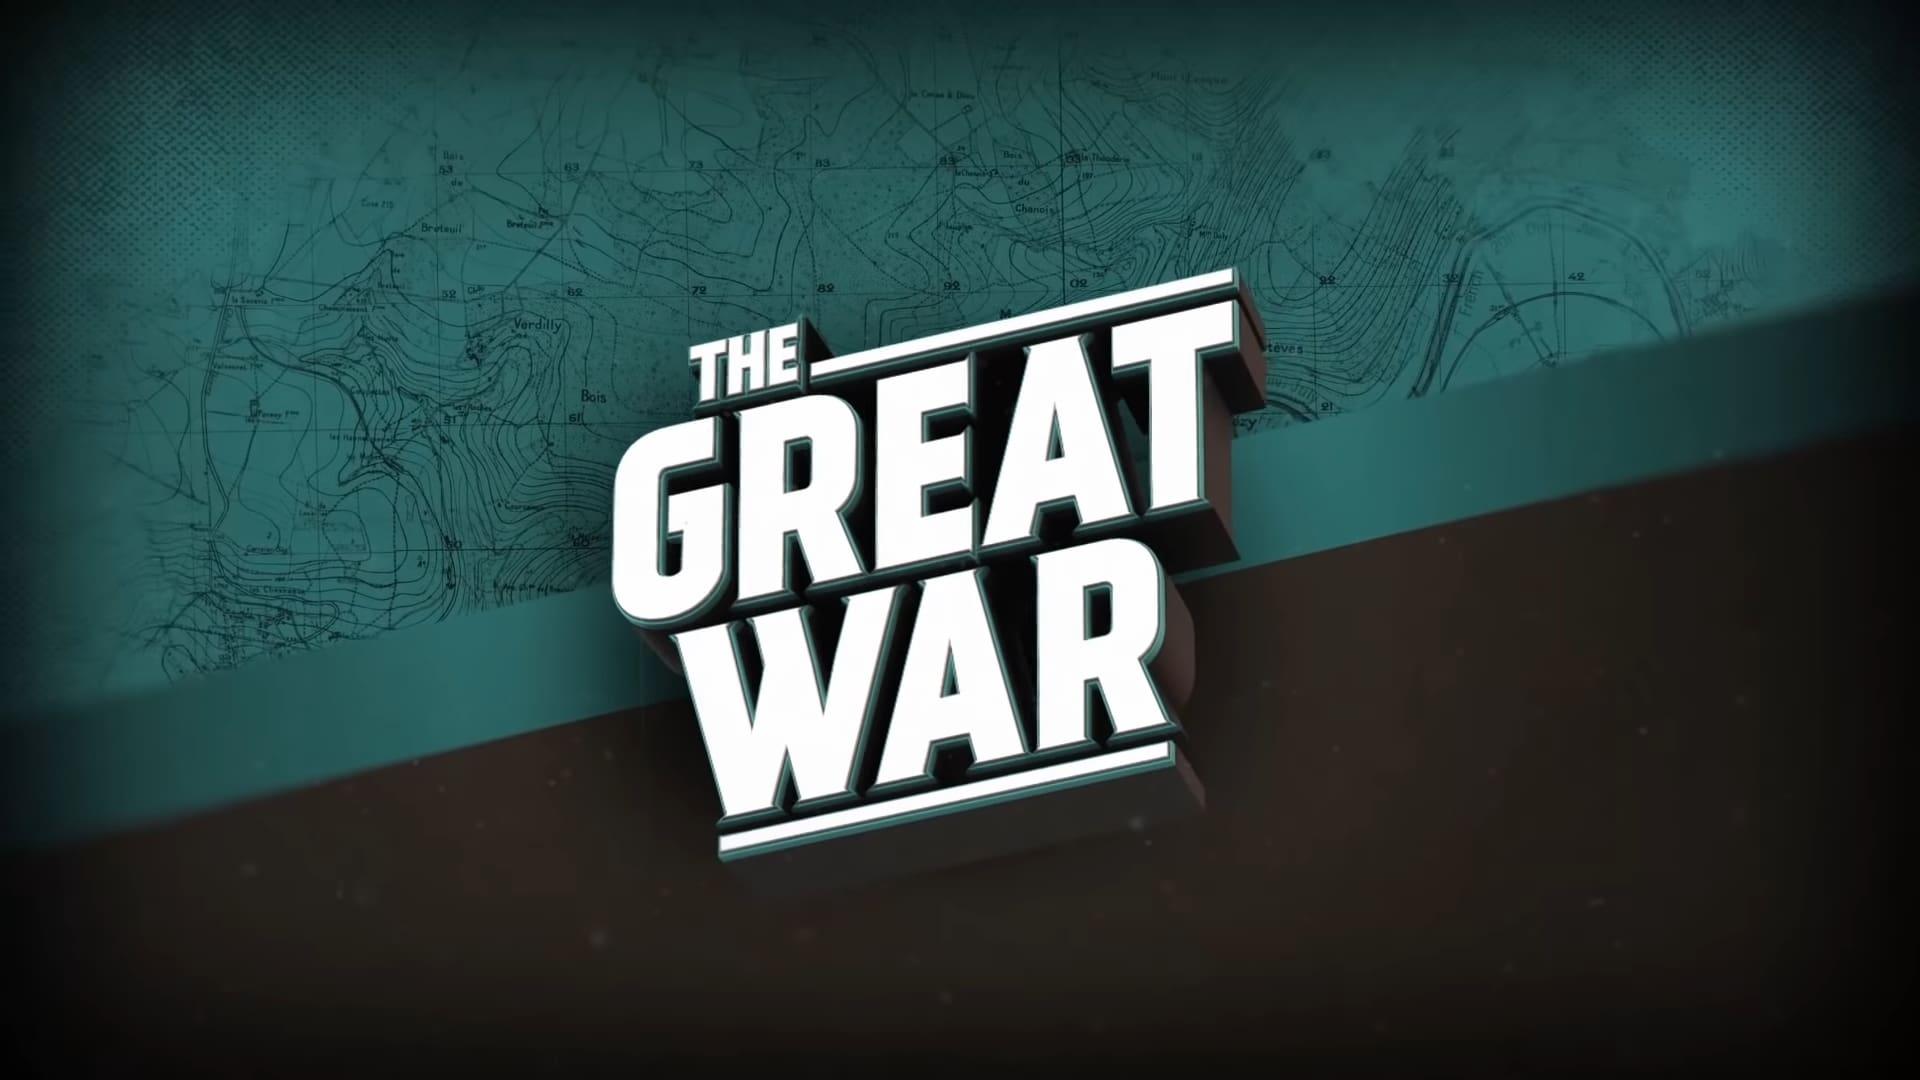 The Great War backdrop